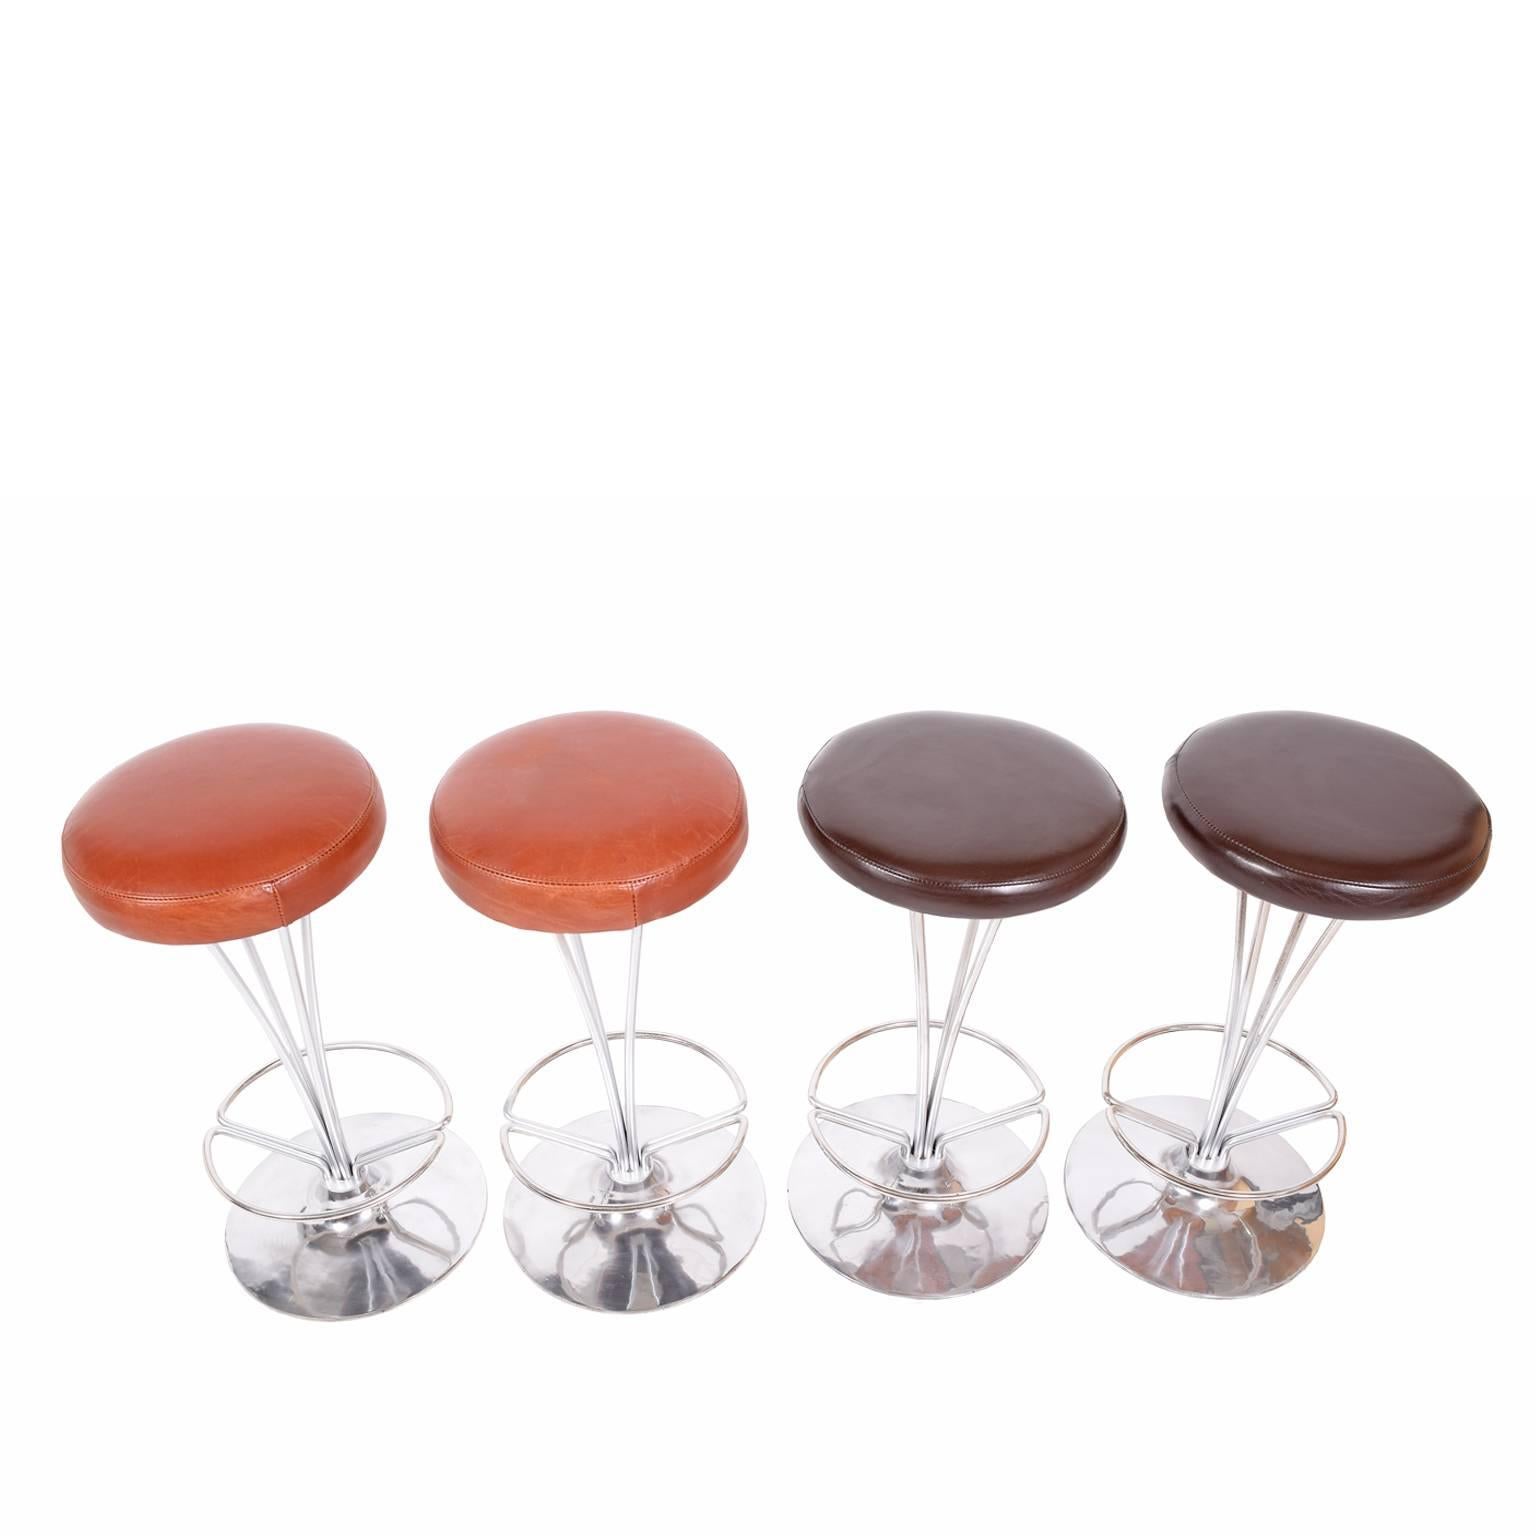 Two pairs of rare, hard to find counter height stools with steel frame and foot rests on aluminum disc base. Brown and orange leather upholstered seats. Made by Fritz Hansen. Sold in pairs only. PAIR ON THE LEFT SOLD 